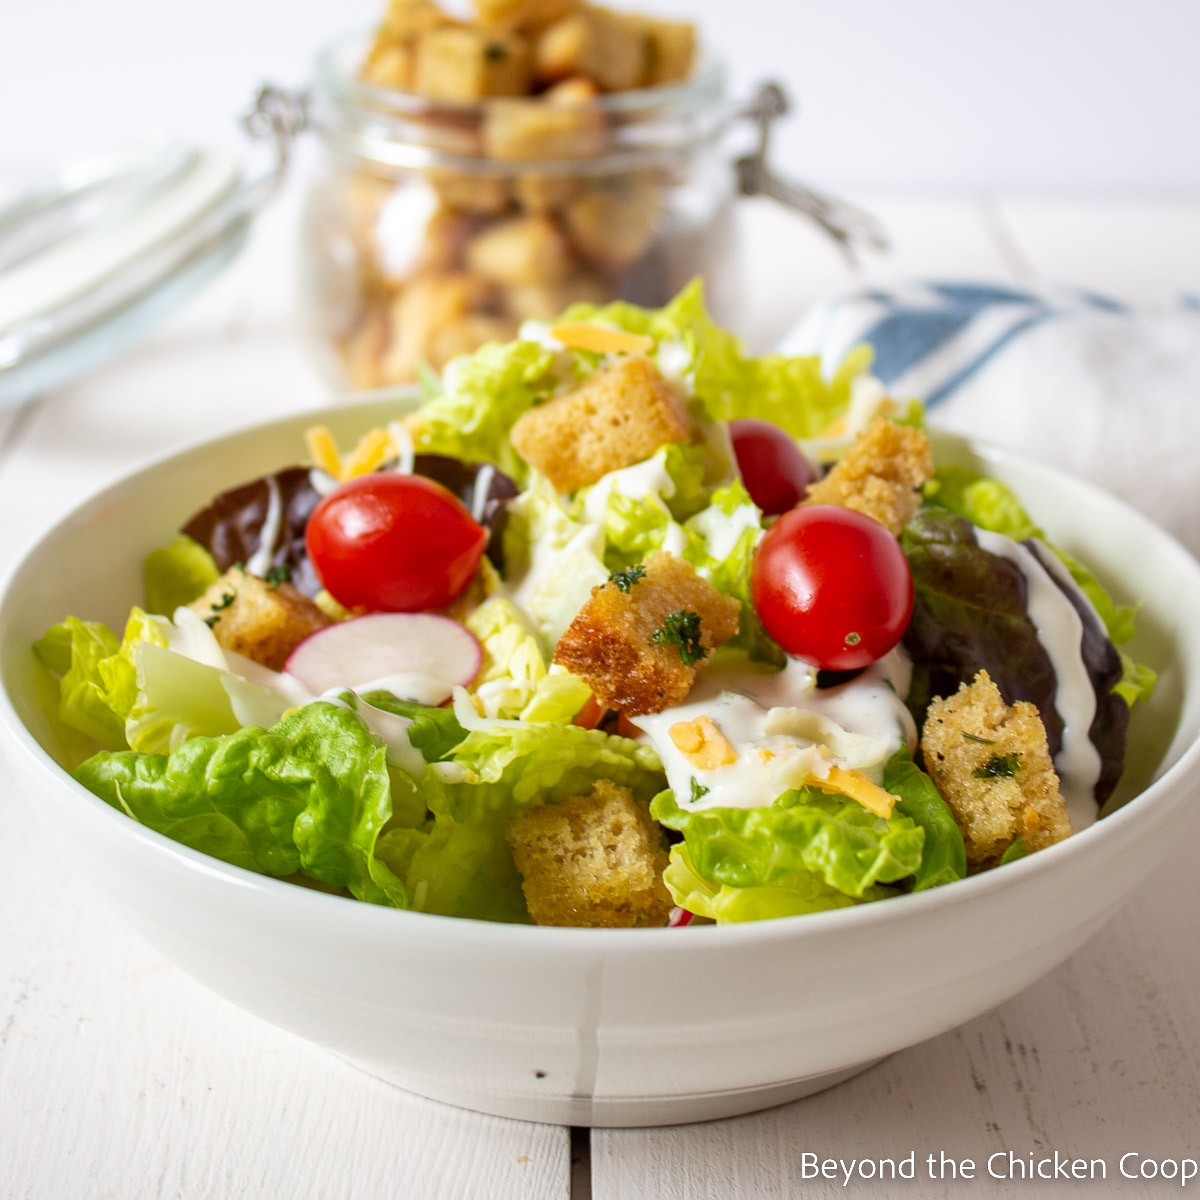 A salad topped with tomatoes and croutons. 